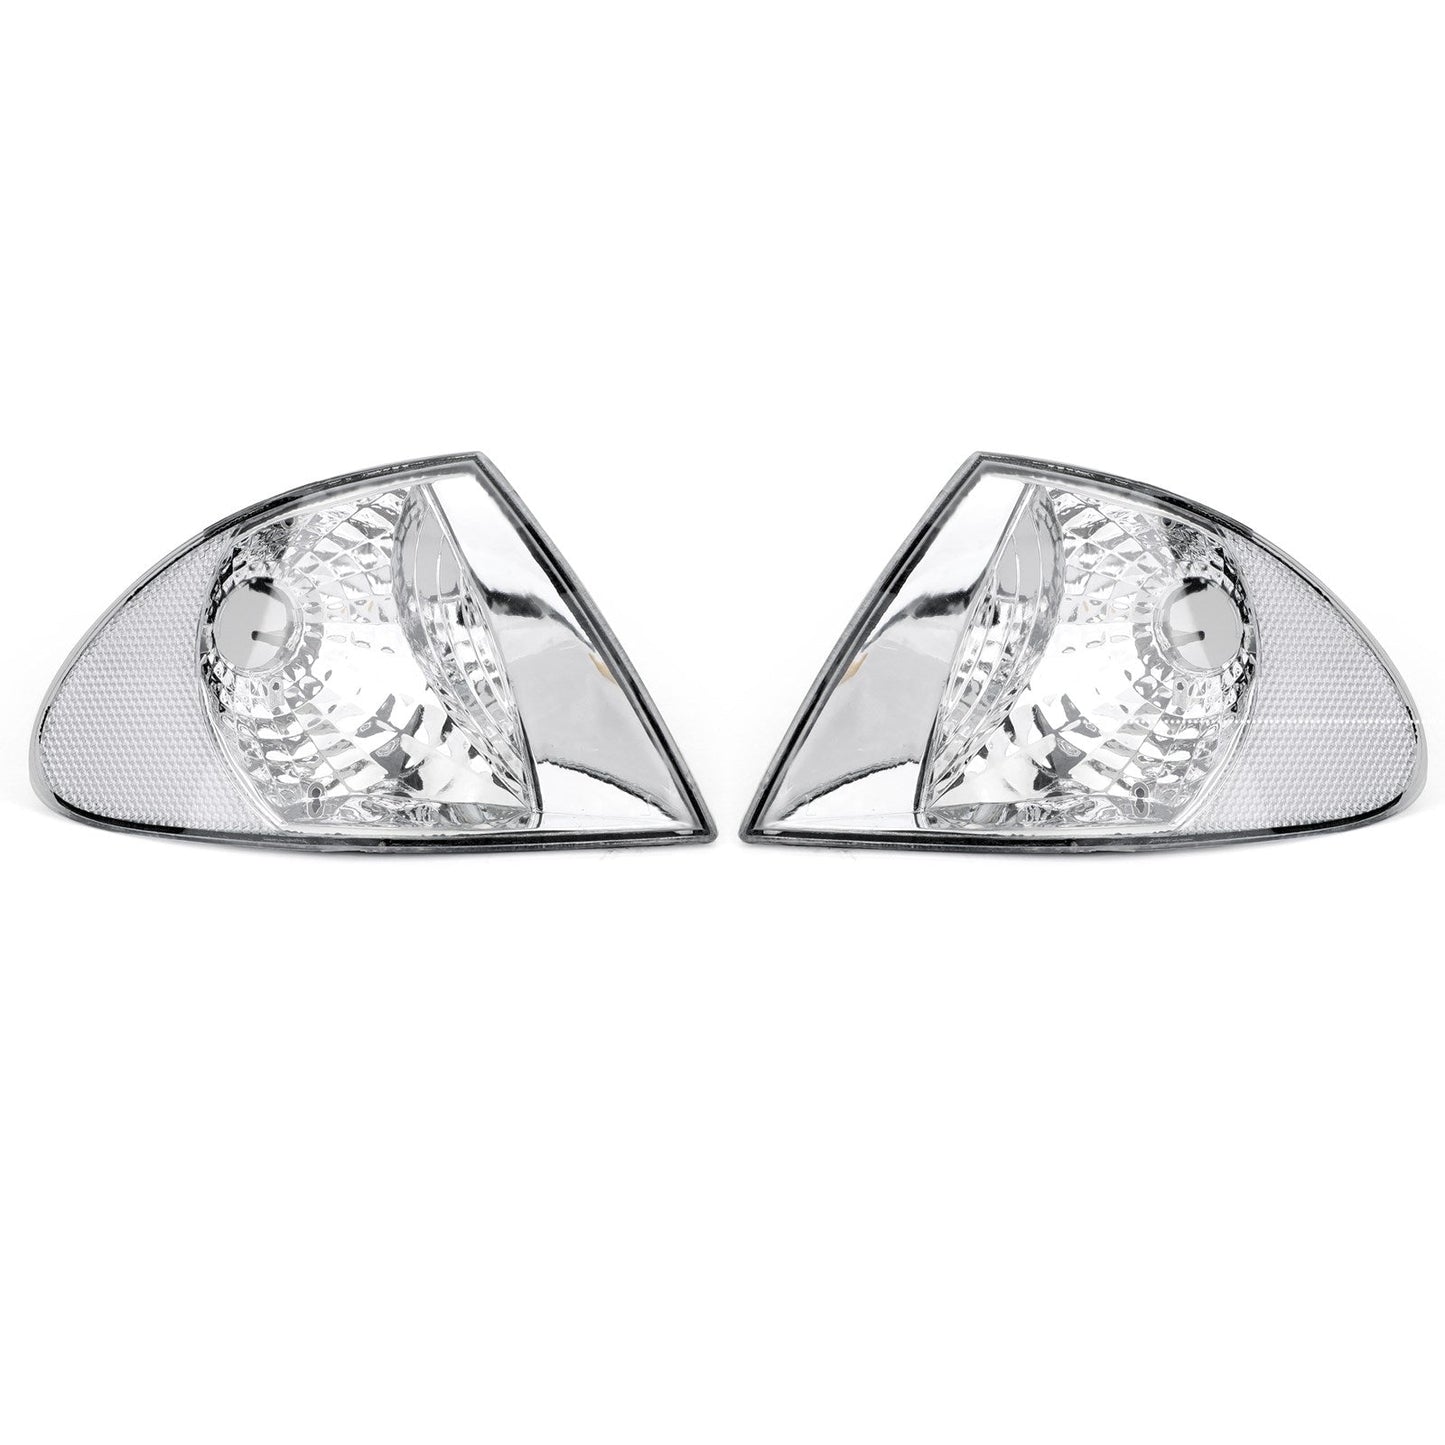 Pair Front Indicator Turn Signal Corner Clear Lights For BMW3 Series E46 98-01